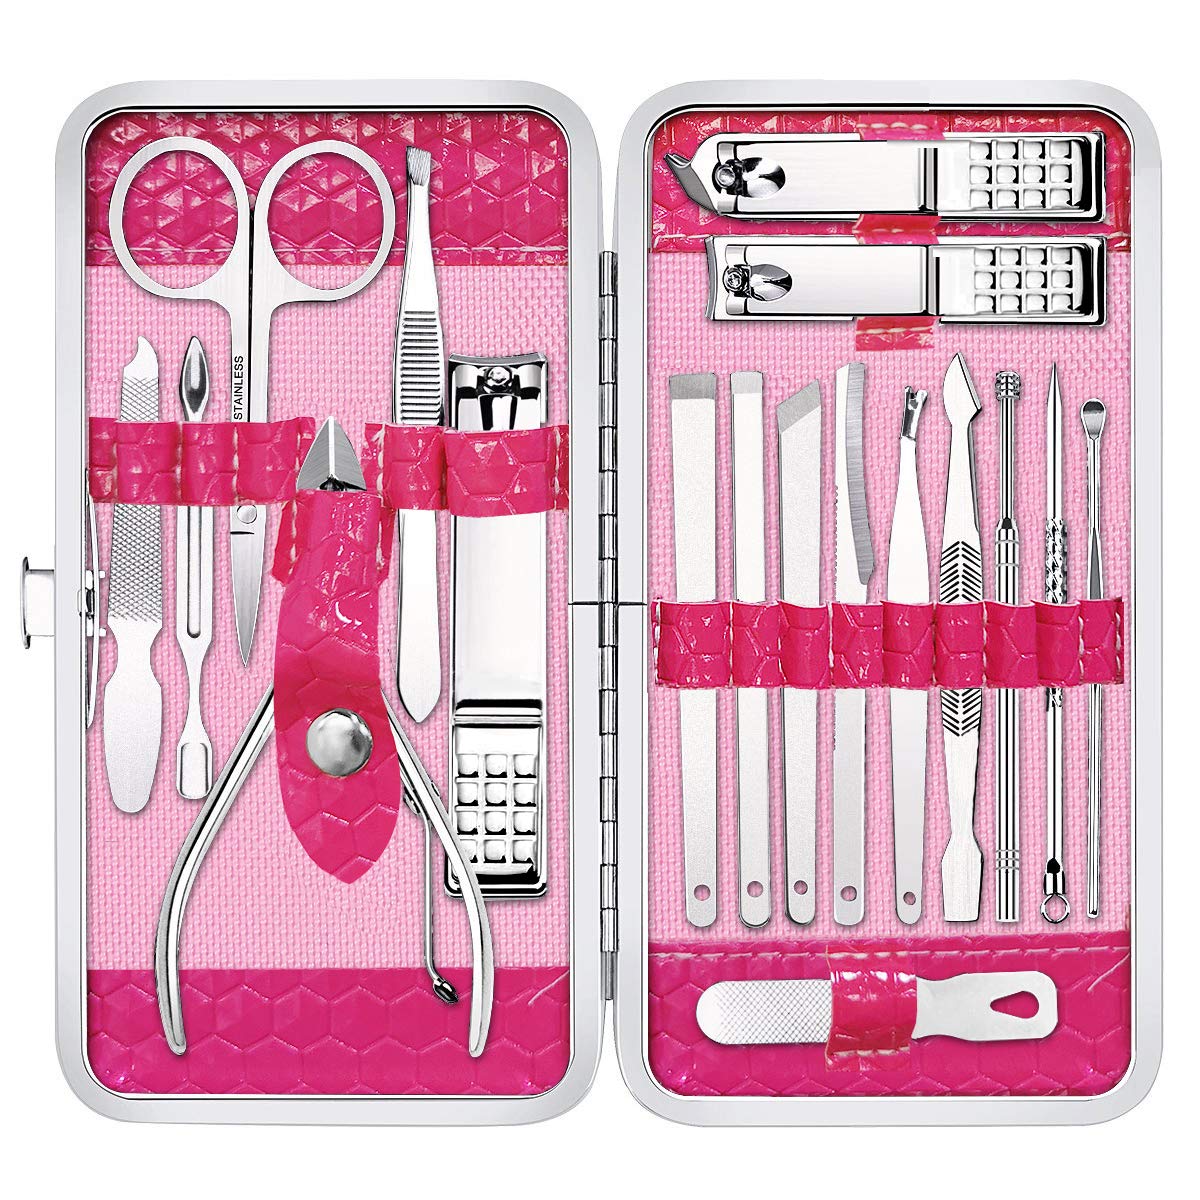 Gift for Women/Men,Nail Care kit Manicure Grooming Set